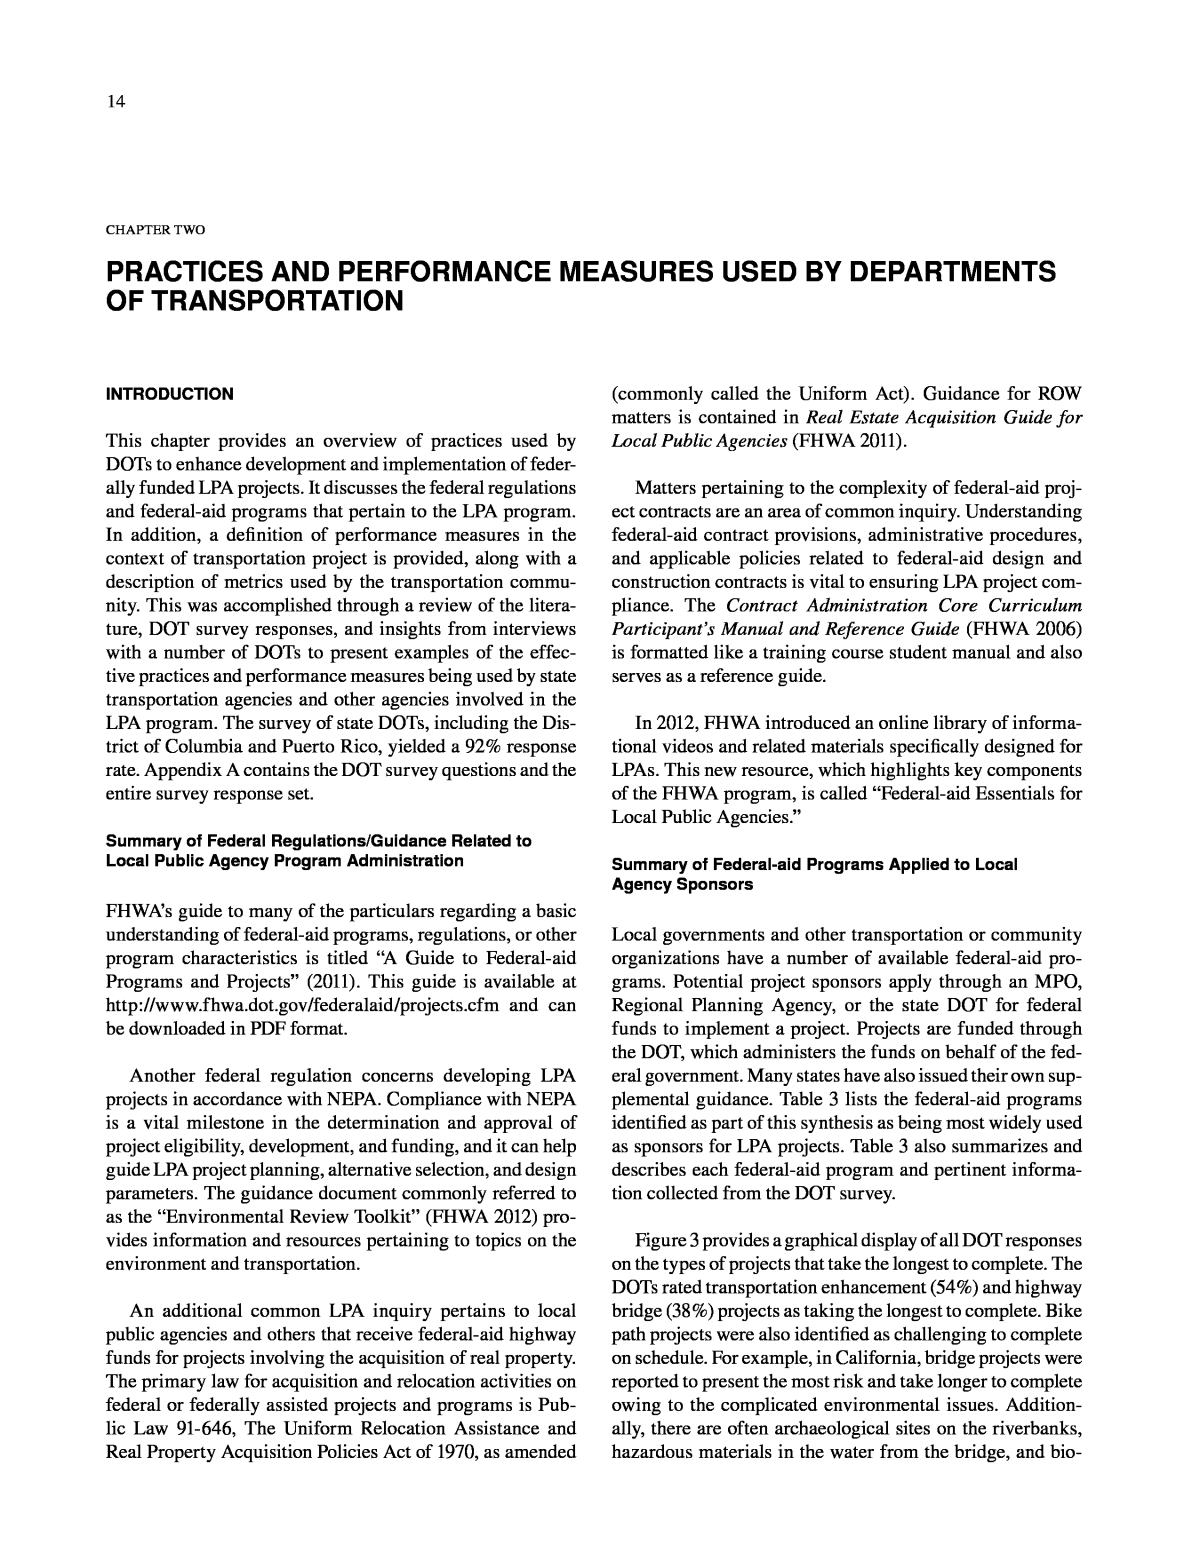 CHAPTER TWO Practices and Performance Measures Used by Departments